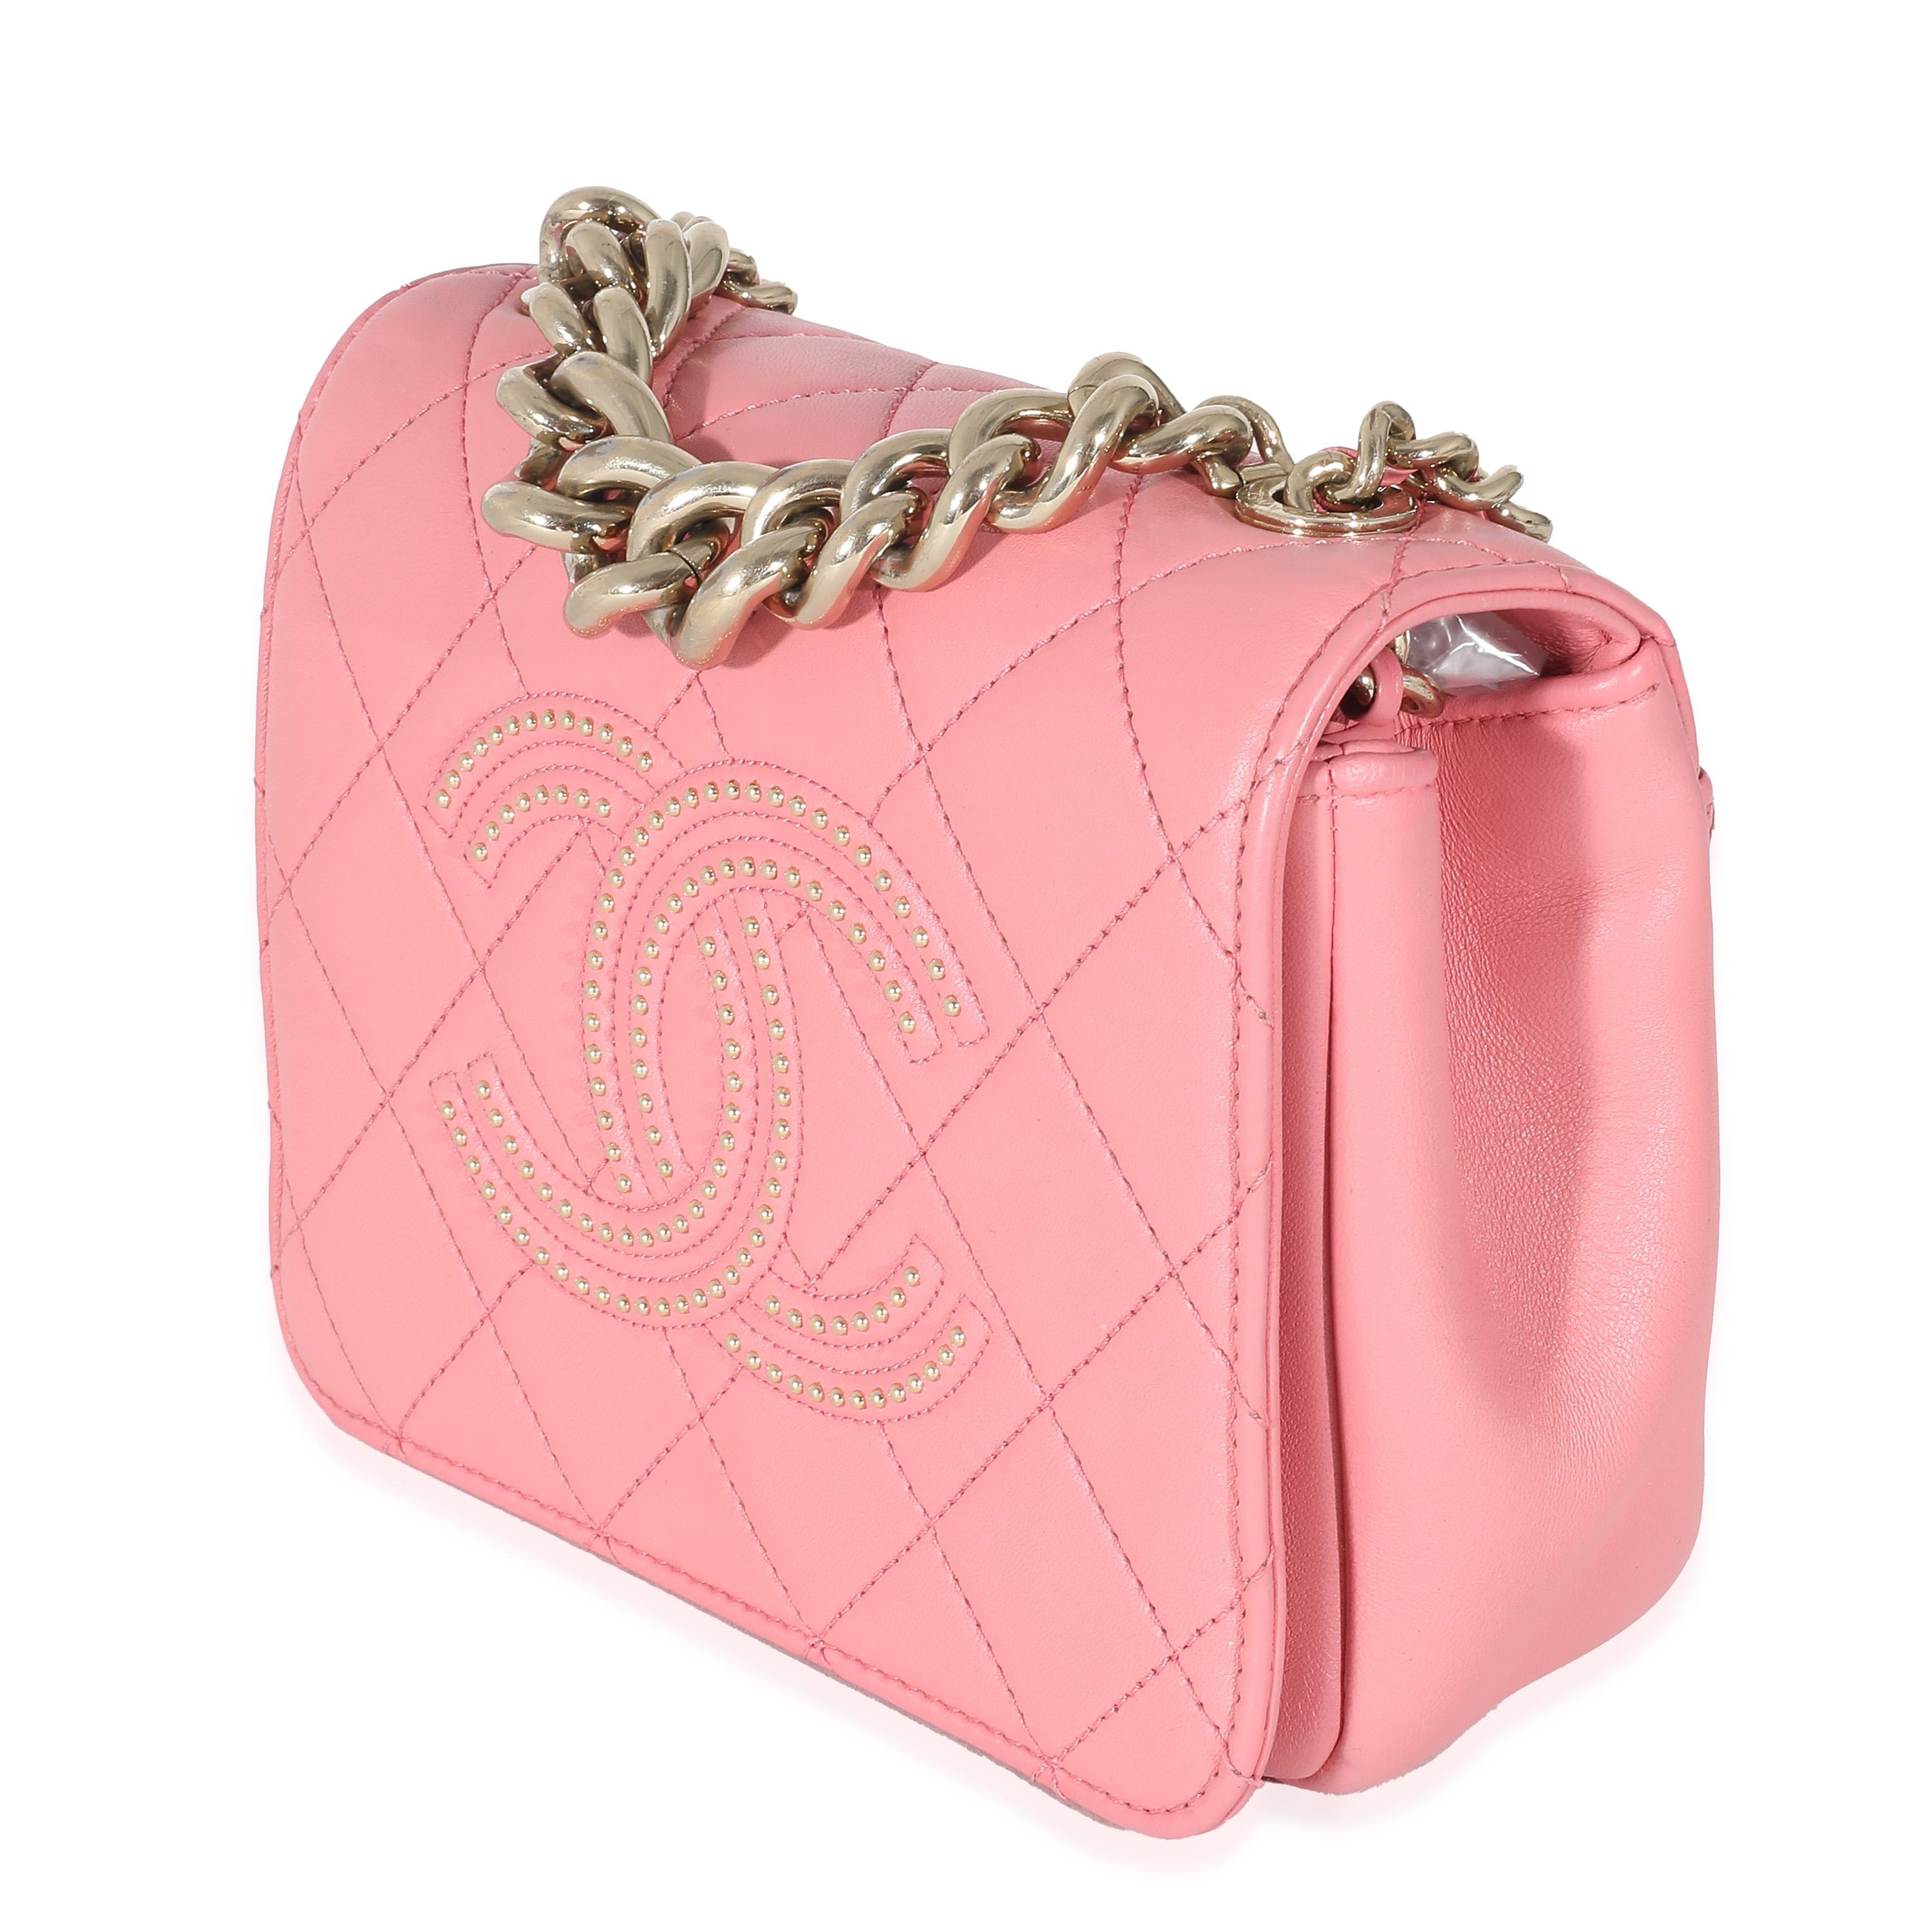 Chanel Pink Quilted Calfskin Beauty Begins Flap Bag In Excellent Condition For Sale In New York, NY